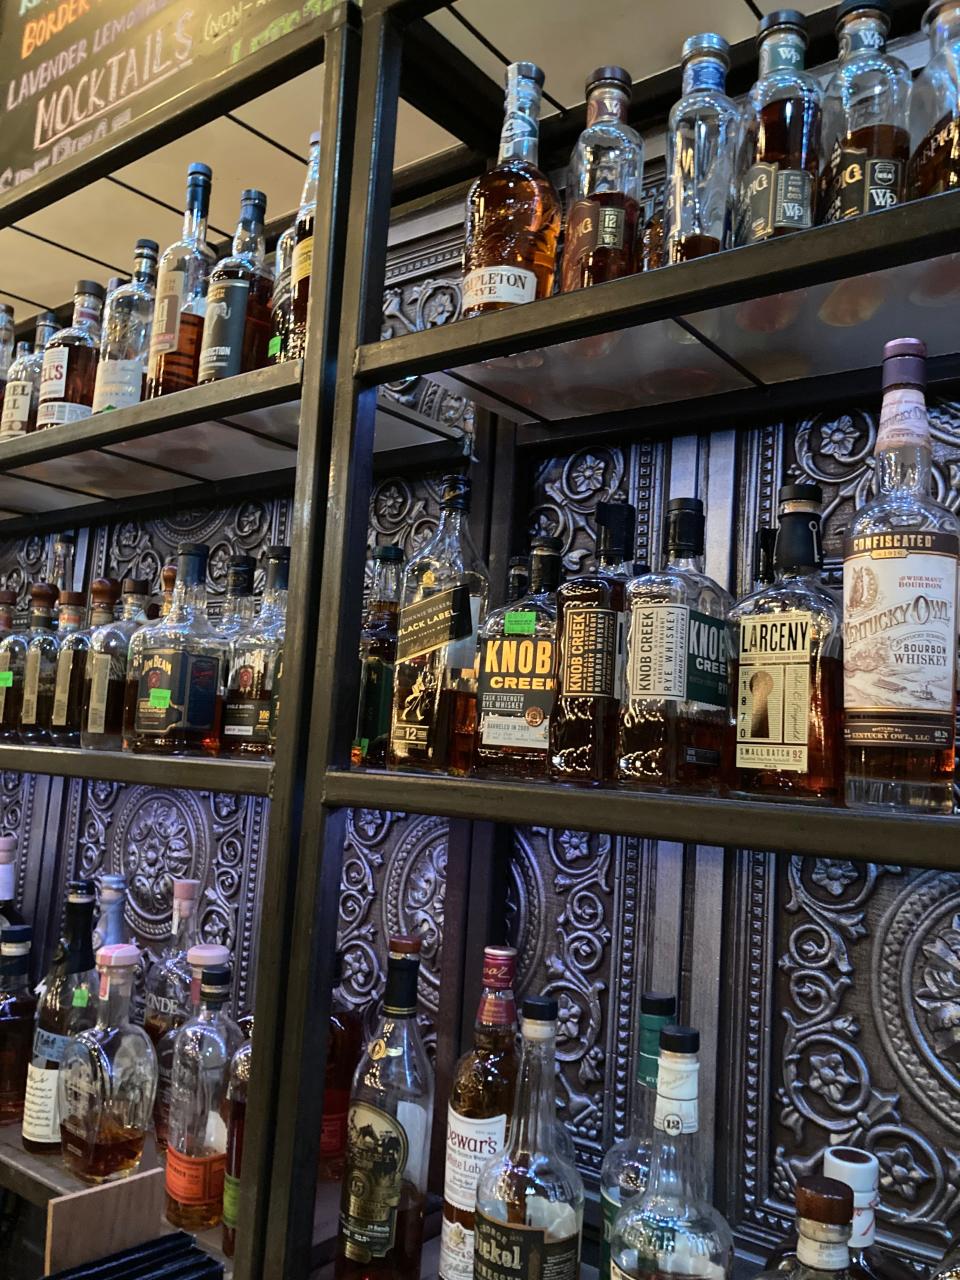 The Blind Elephant in downtown Wilmington carries more than 100 different bourbons and whiskeys.